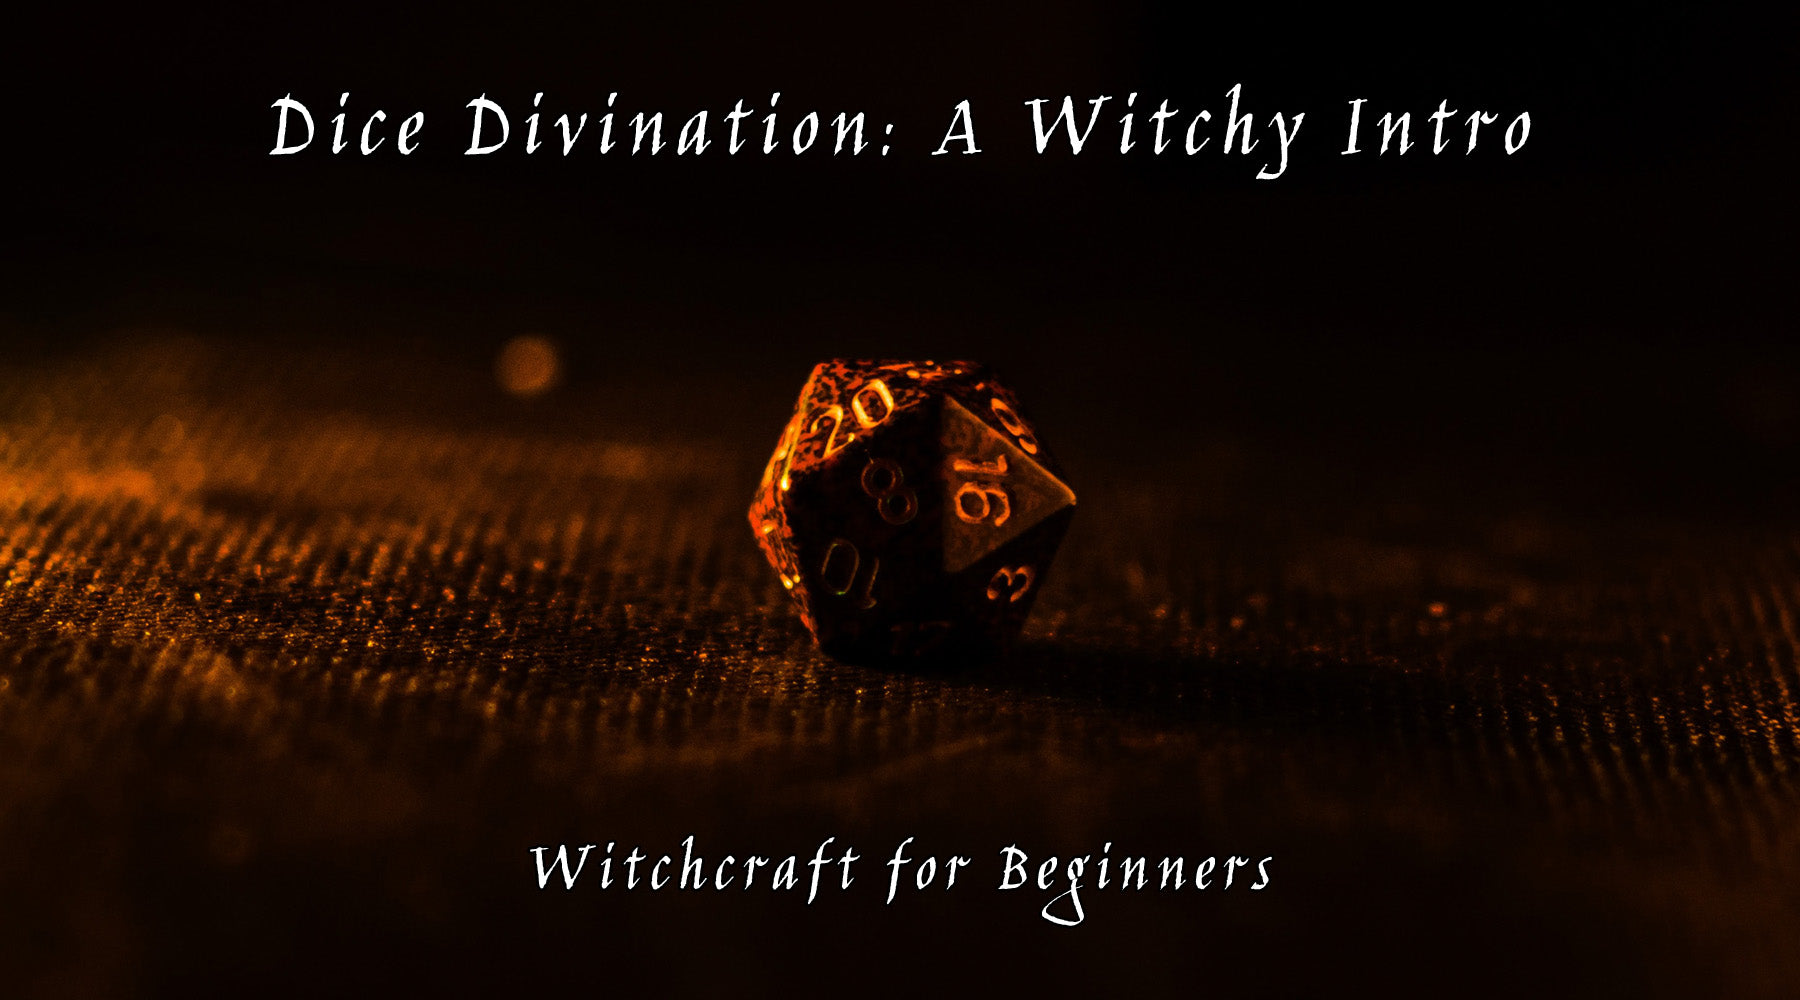 Dice Divination: A Witchy Intro